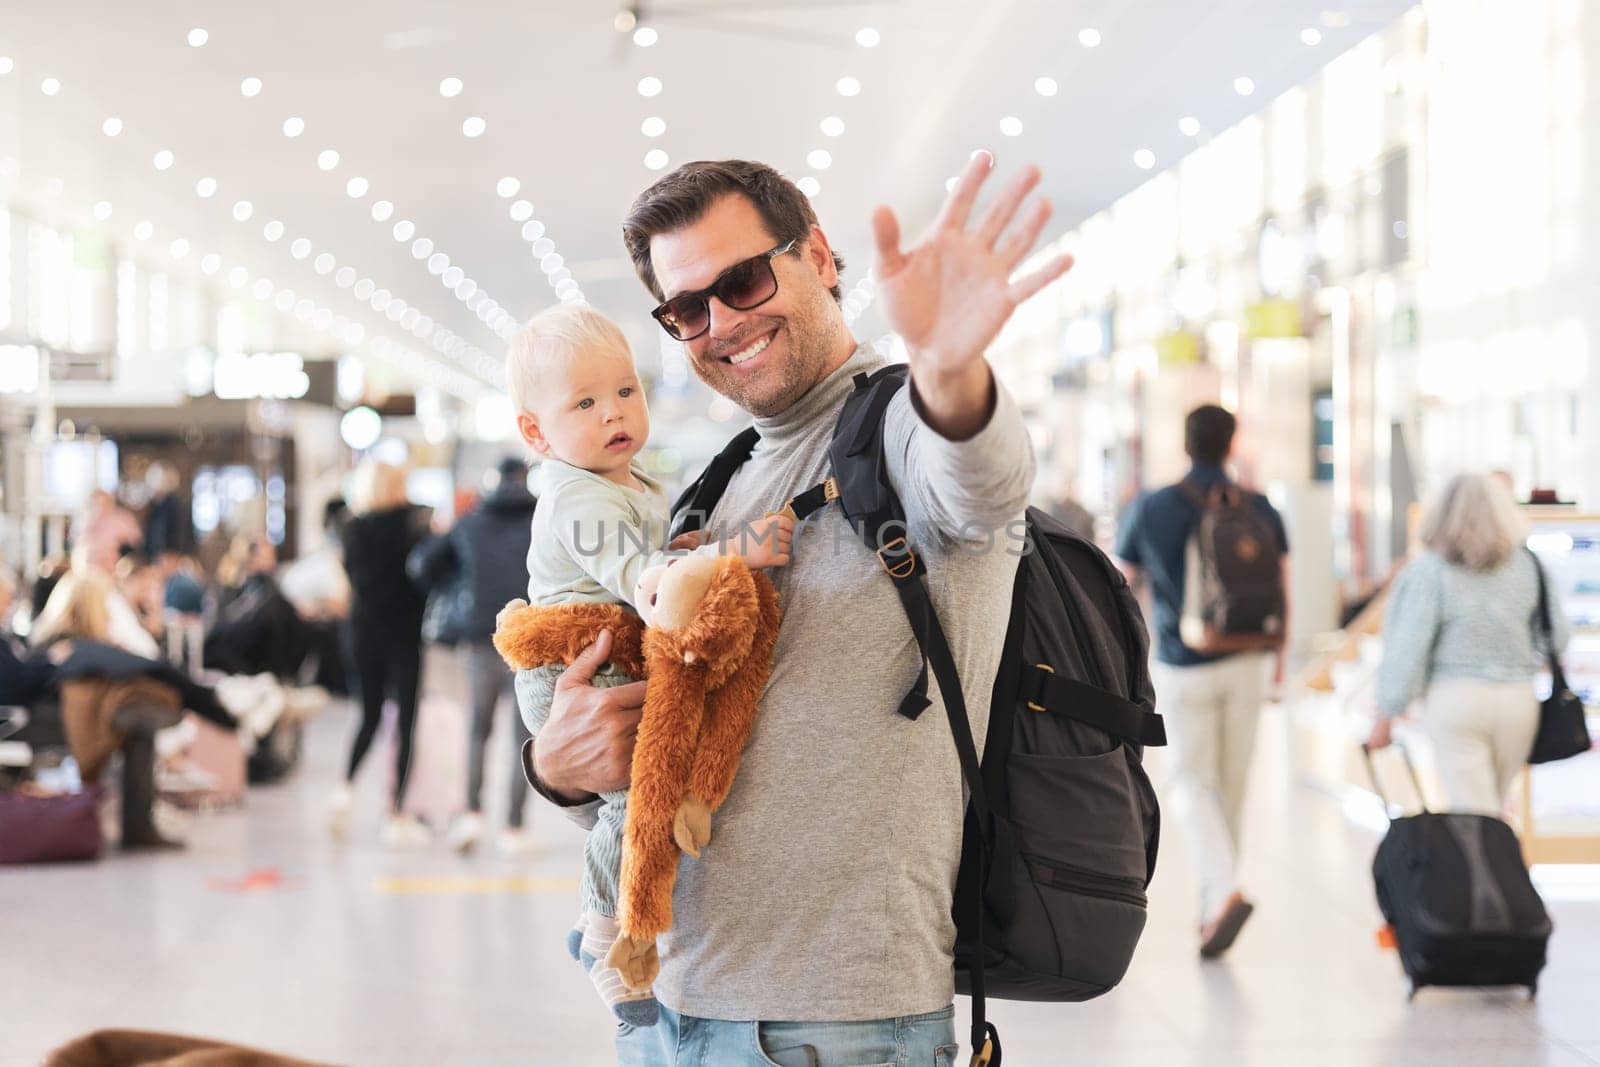 Father traveling with child, holding his infant baby boy at airport terminal waiting to board a plane waving goodby. Travel with kids concept